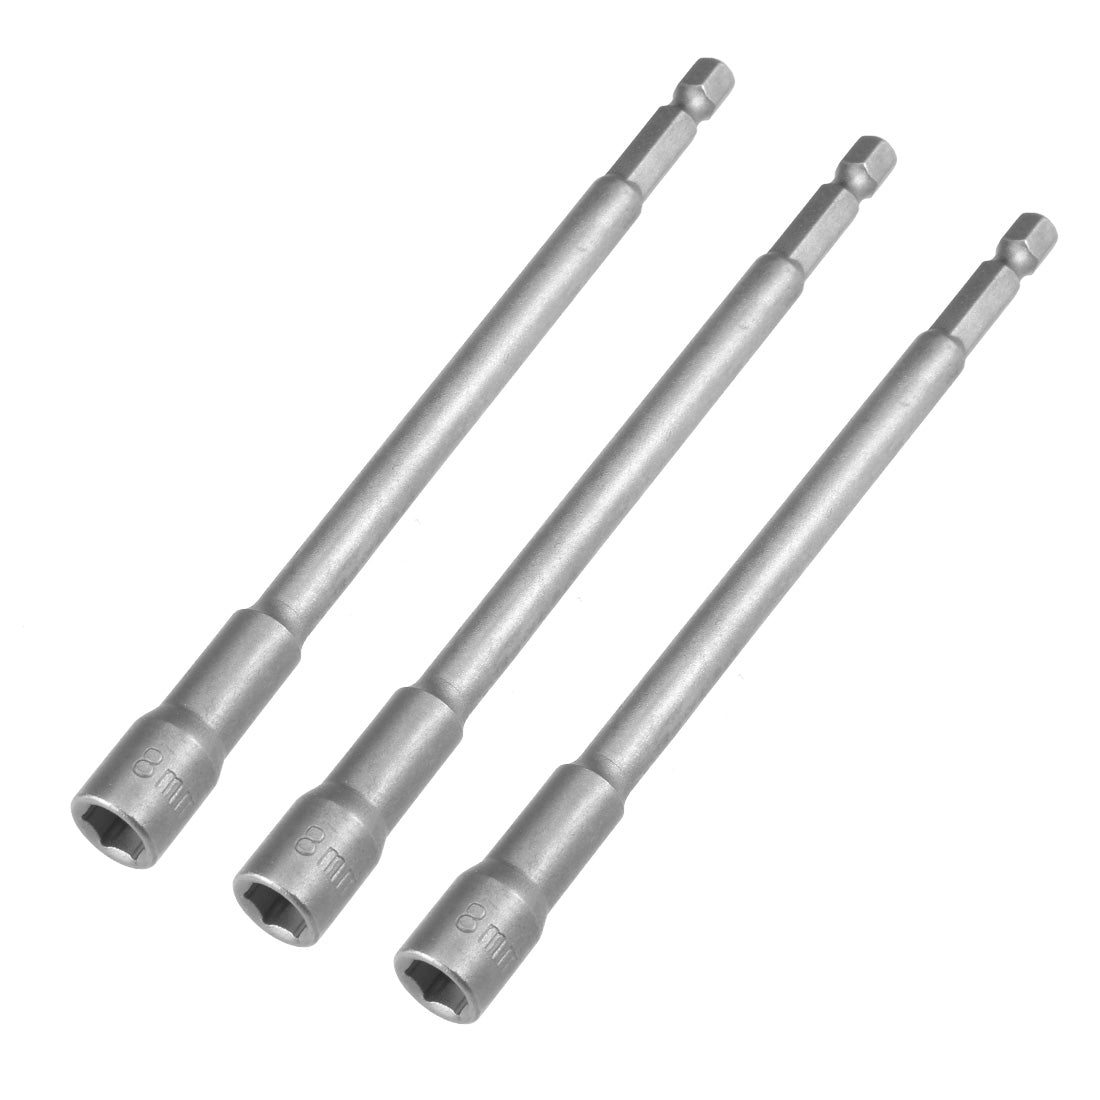 uxcell Uxcell 3 Pcs 1/4" Quick-Change Hex Shank 8mm Magnetic Nut Sockets Driver, 150mm Length